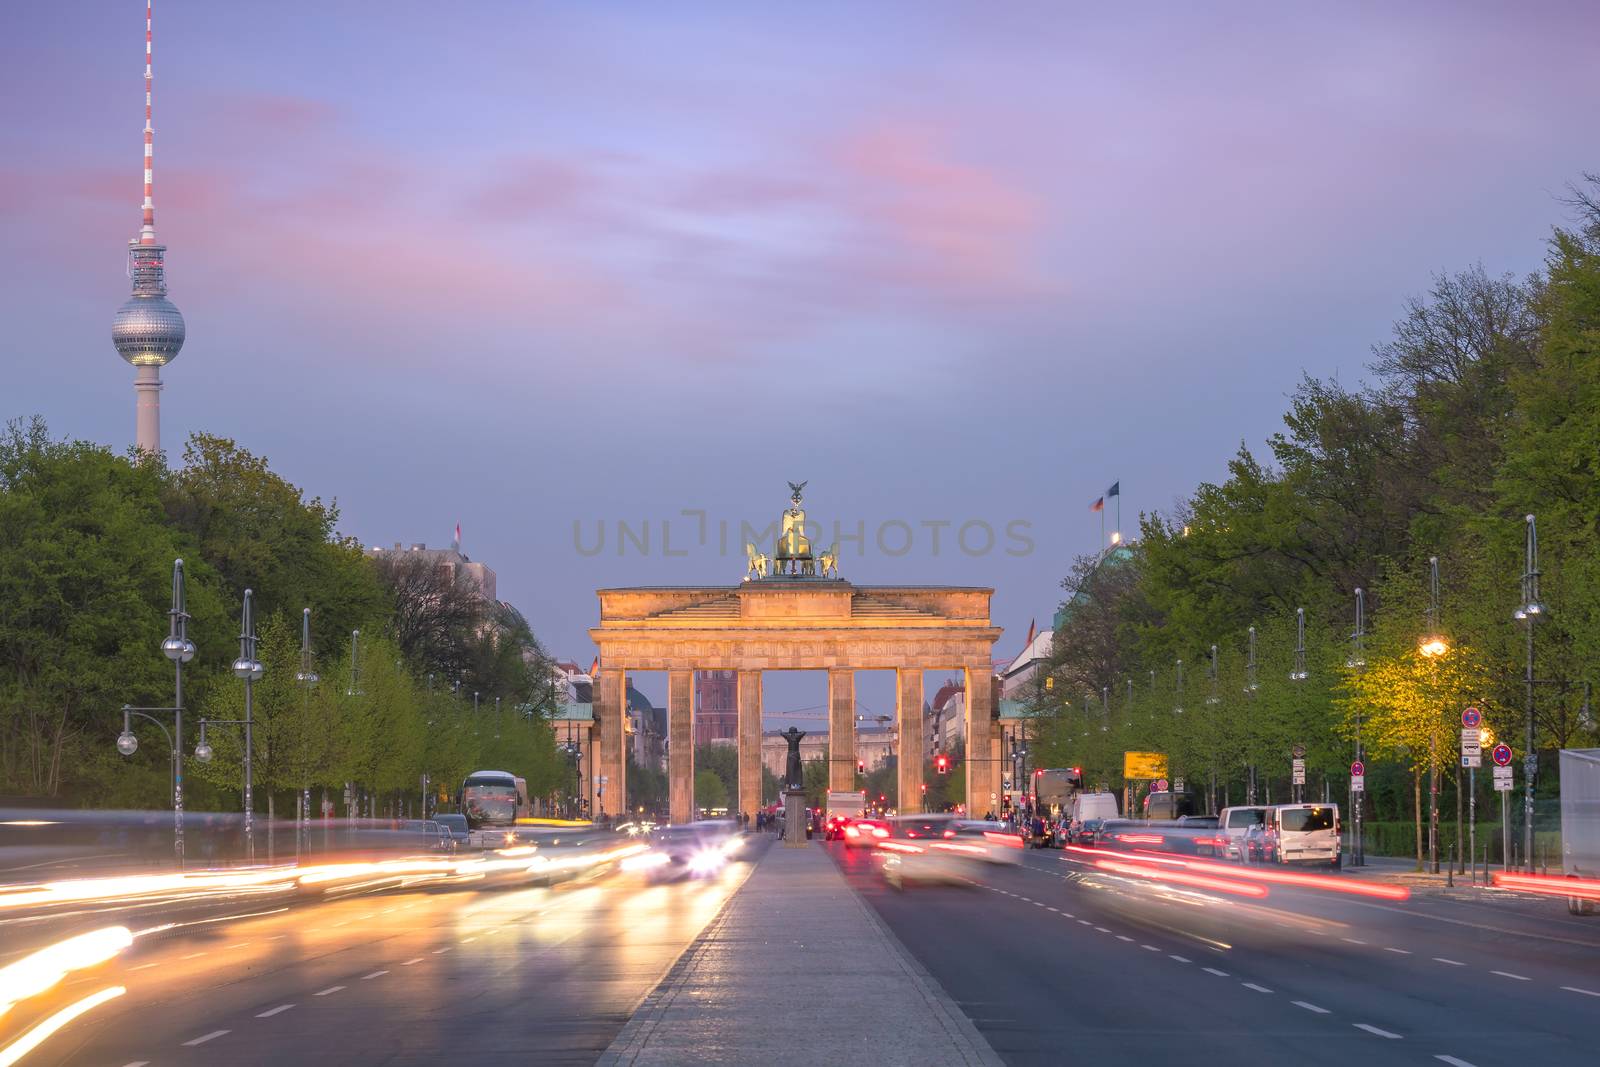 The Brandenburg Gate in Berlin at sunset by f11photo